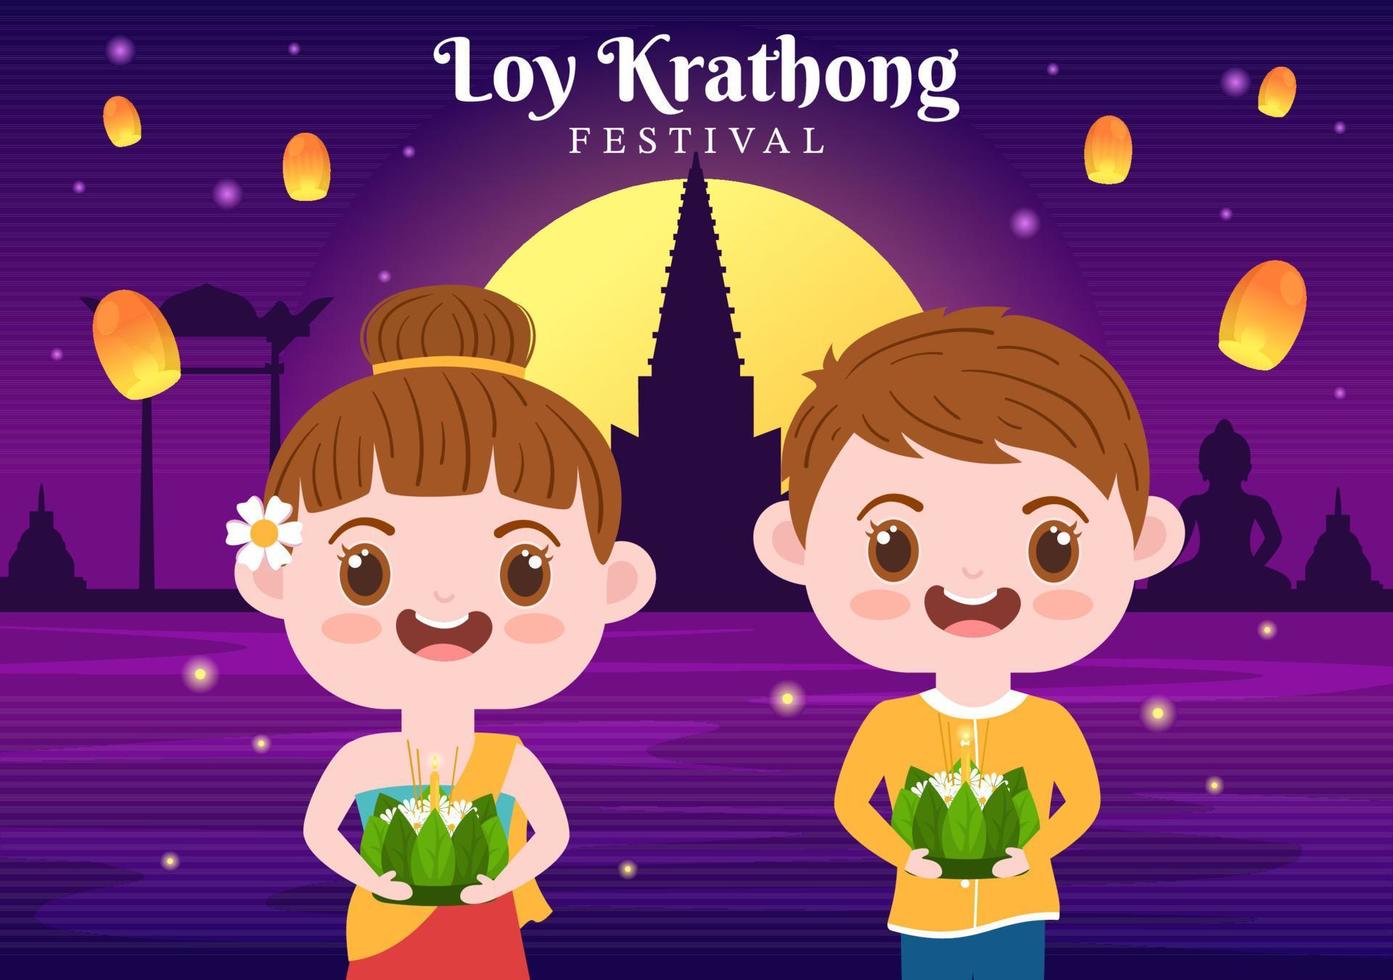 Loy Krathong Festival Celebration in Thailand Template Hand Drawn Cartoon Flat Illustration with Lanterns and Krathongs Floating on Water Design vector